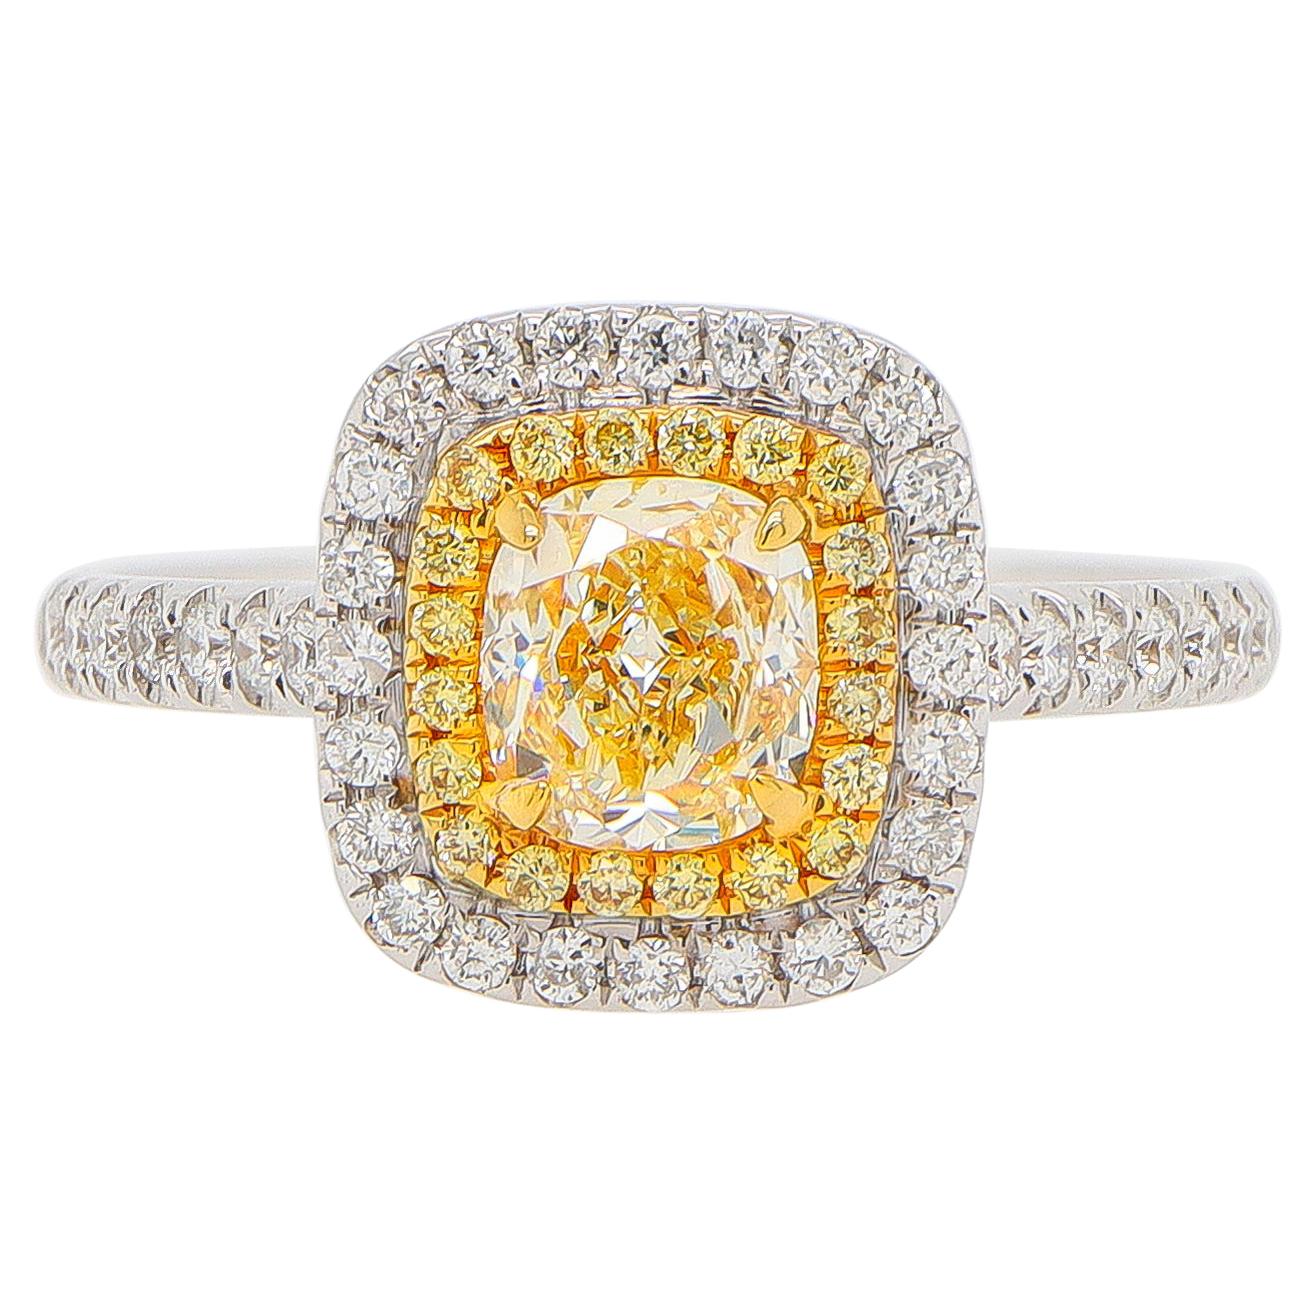 Fancy Yellow Diamond Contemporary Ring with Double Halo 18K Gold